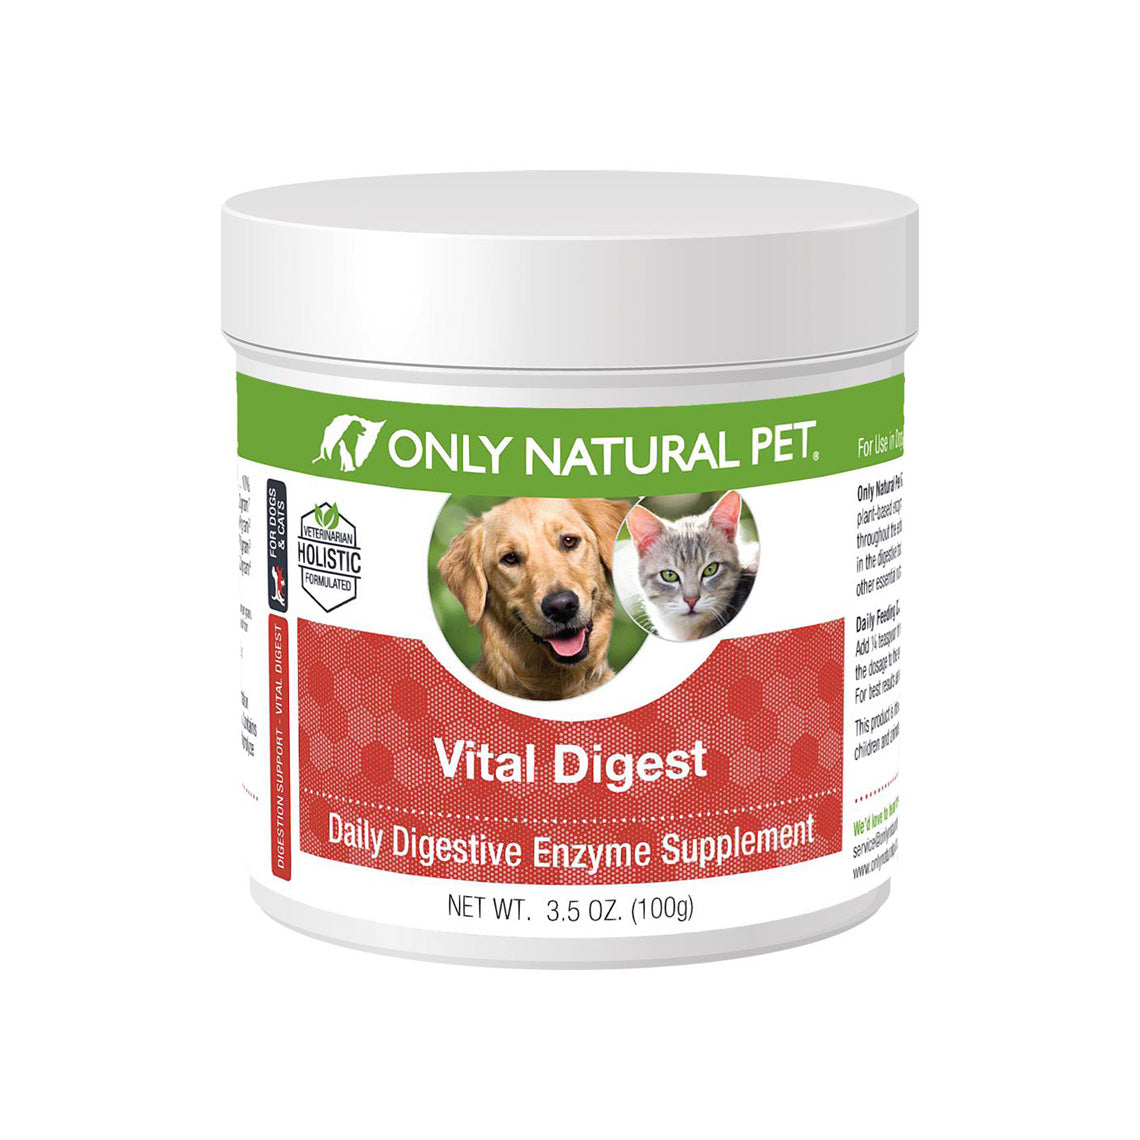 Only Natural Pet Vital Digest Digestive Enzymes | Only Natural Pet